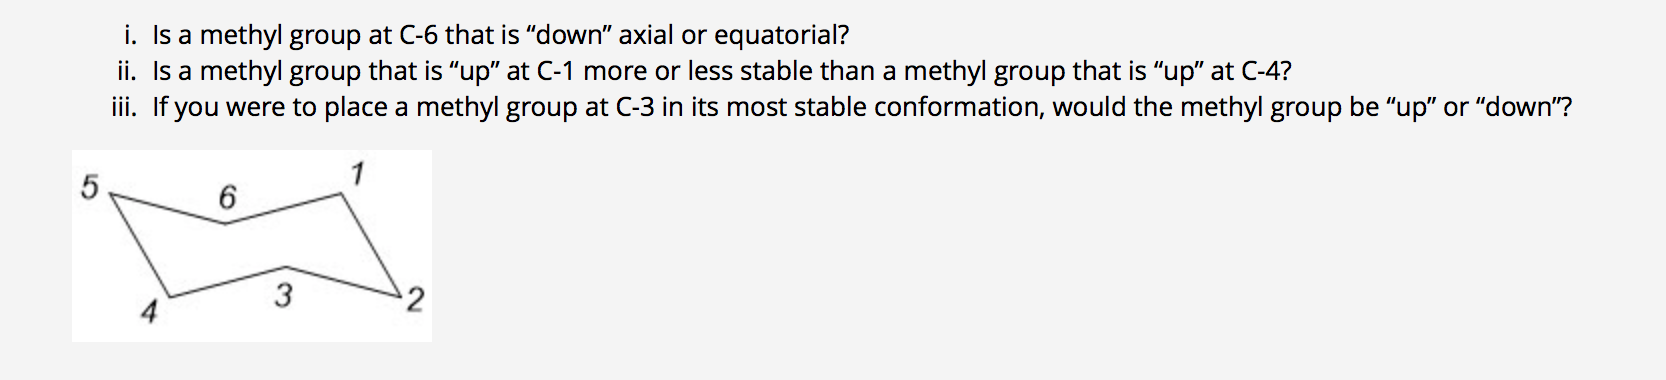 i. Is a methyl group at C-6 that is "down" axial or equatorial?
ii. Is a methyl group that is "up" at C-1 more or less stable than a methyl group that is "up" at C-4?
i. If you were to place a methyl group at C-3 in its most stable conformation, would the methyl group be "up" or "down"?
1
2
